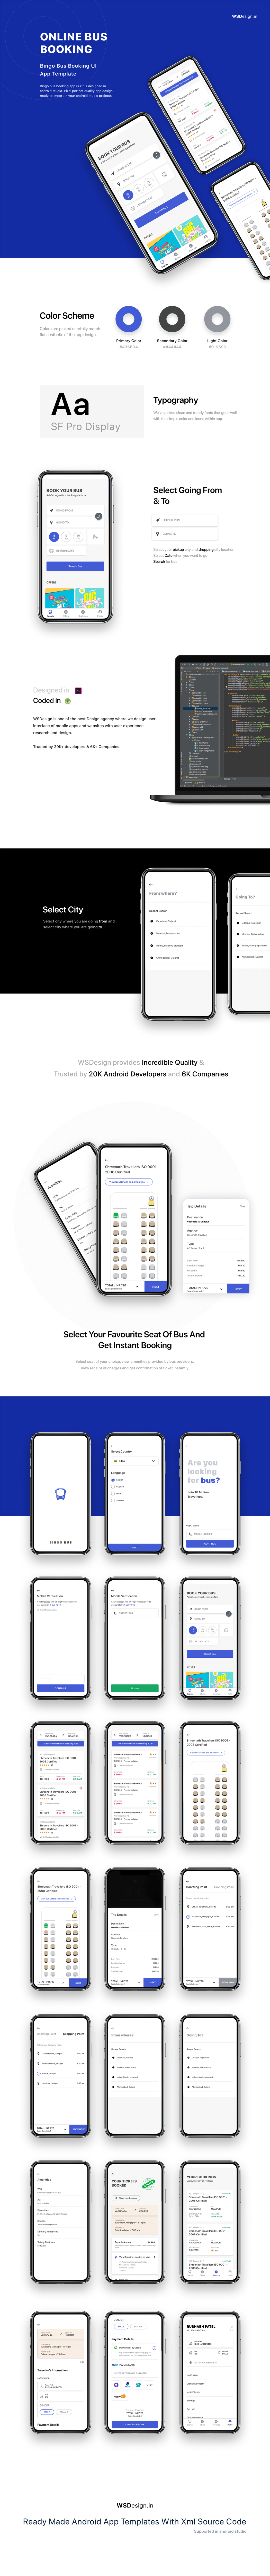 Bus Booking Android App Template red bus clone Android Studio UIUX design design agency